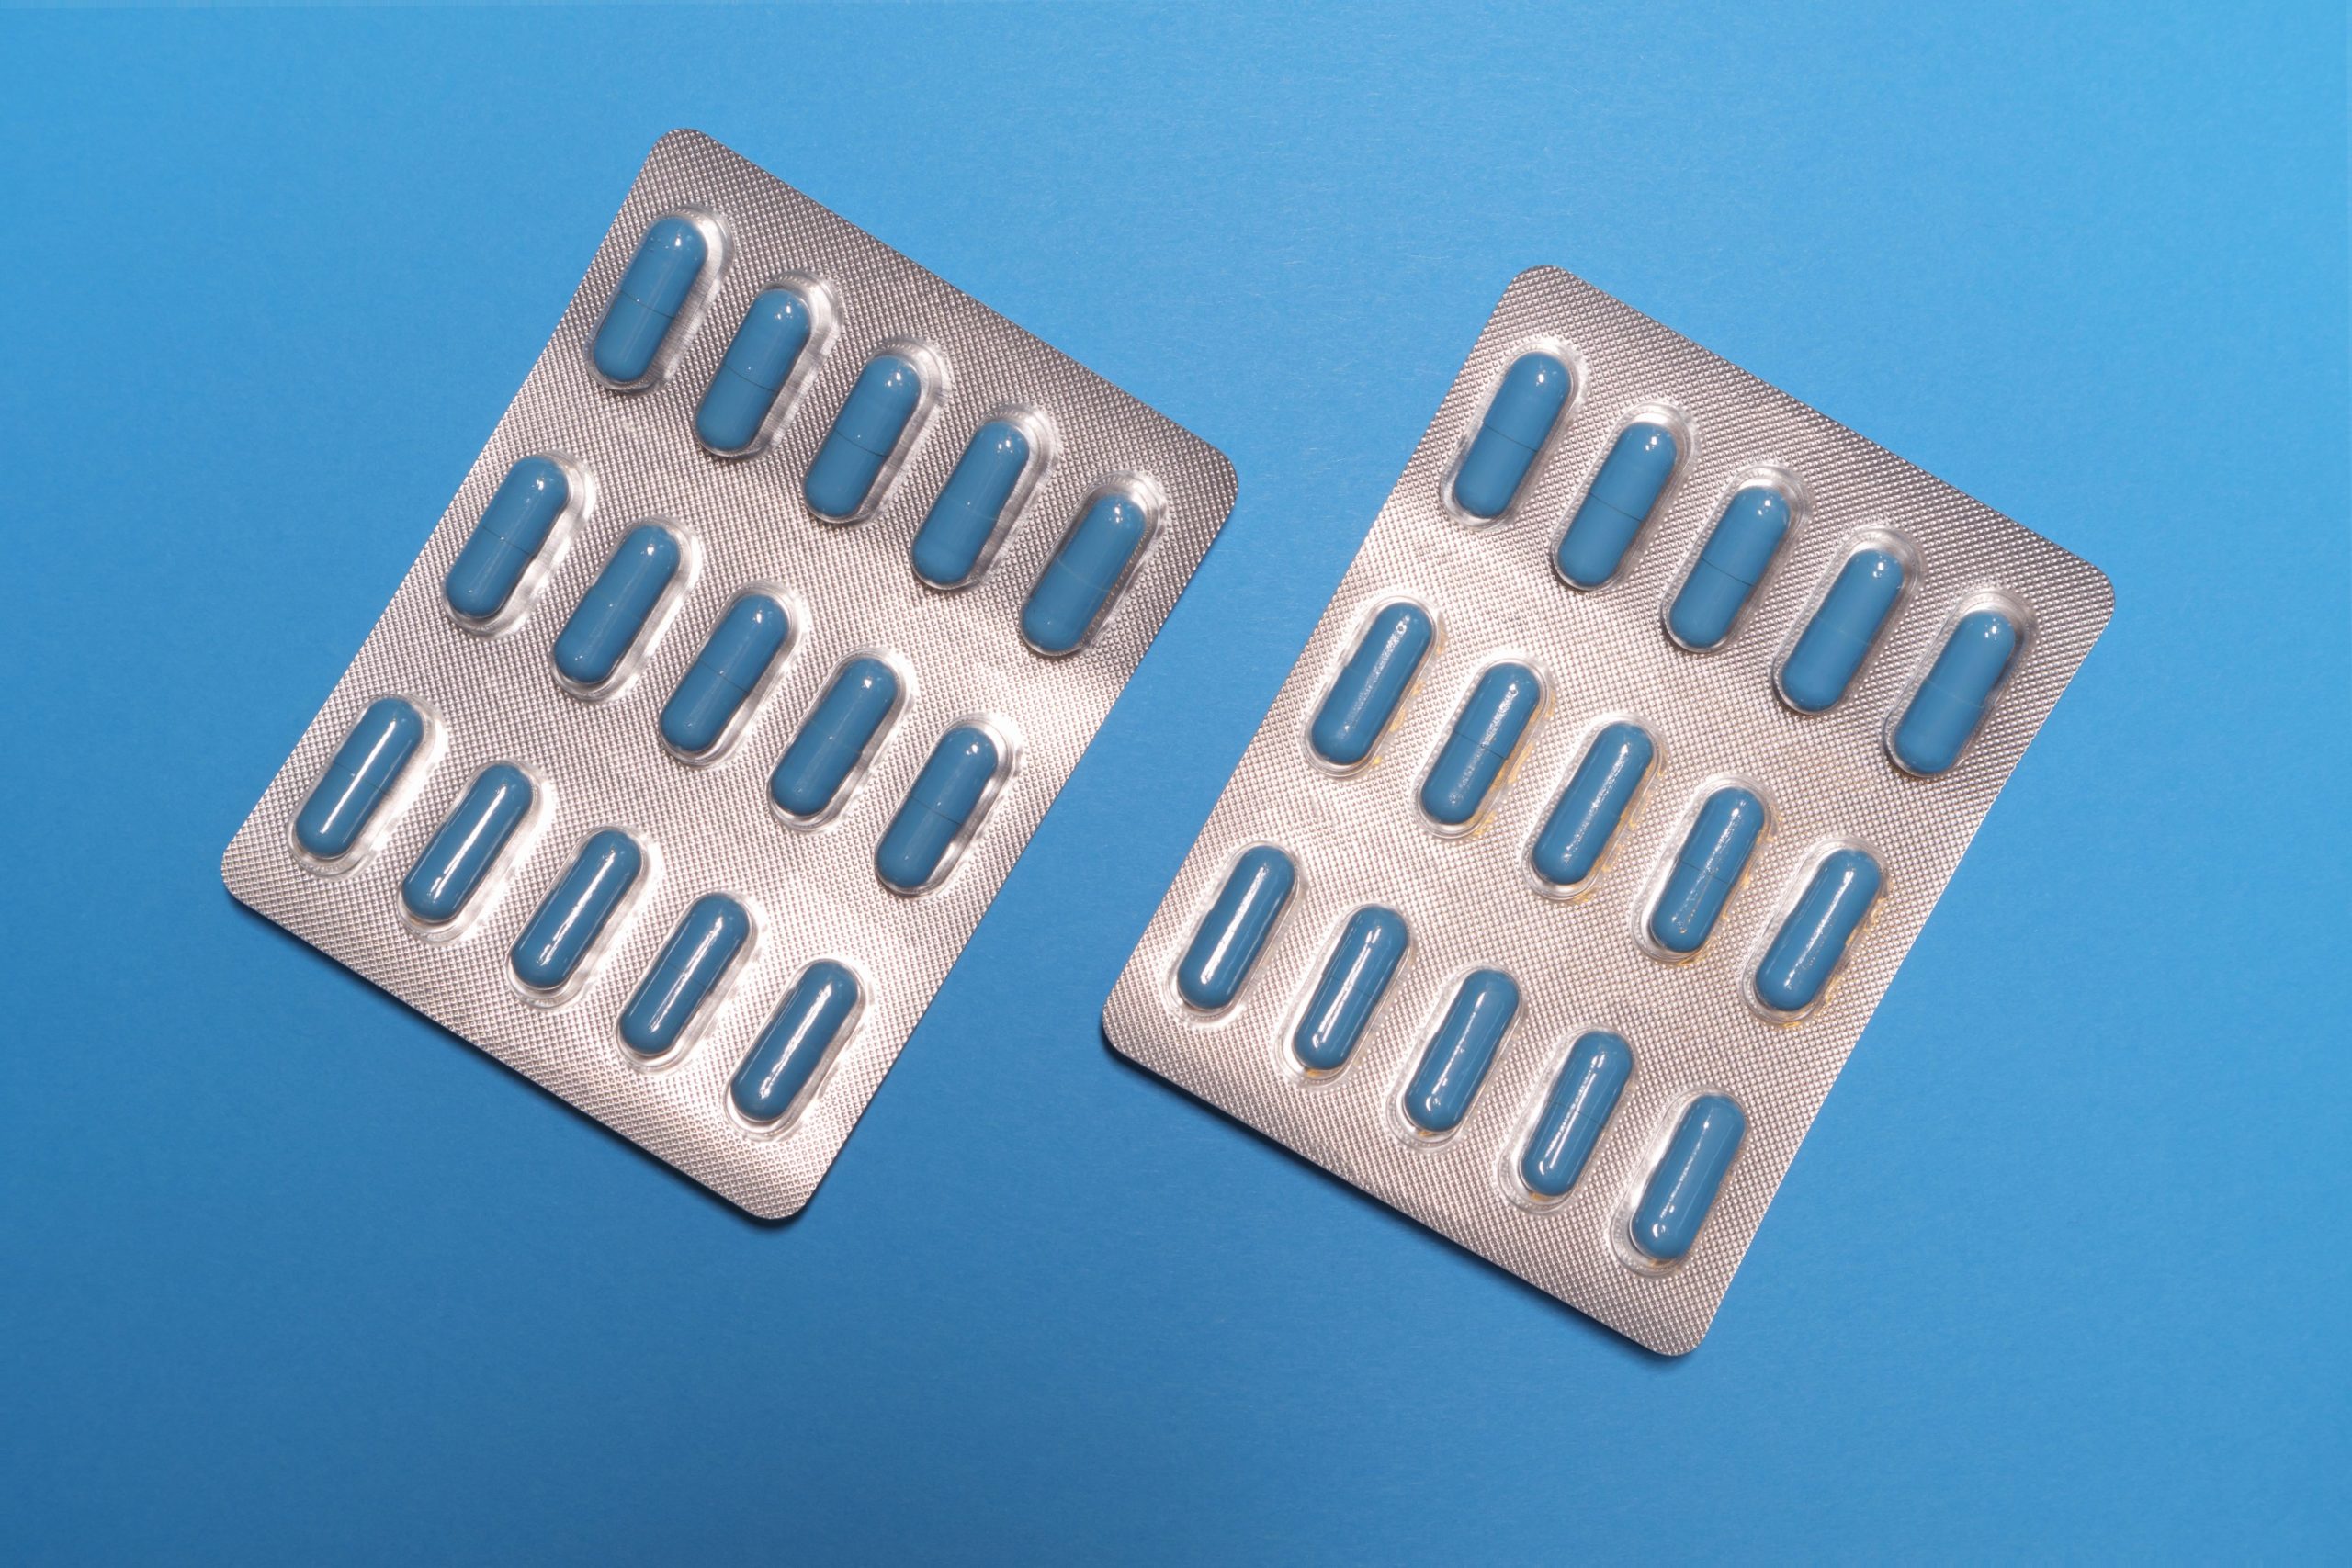 blister packs on a blue background